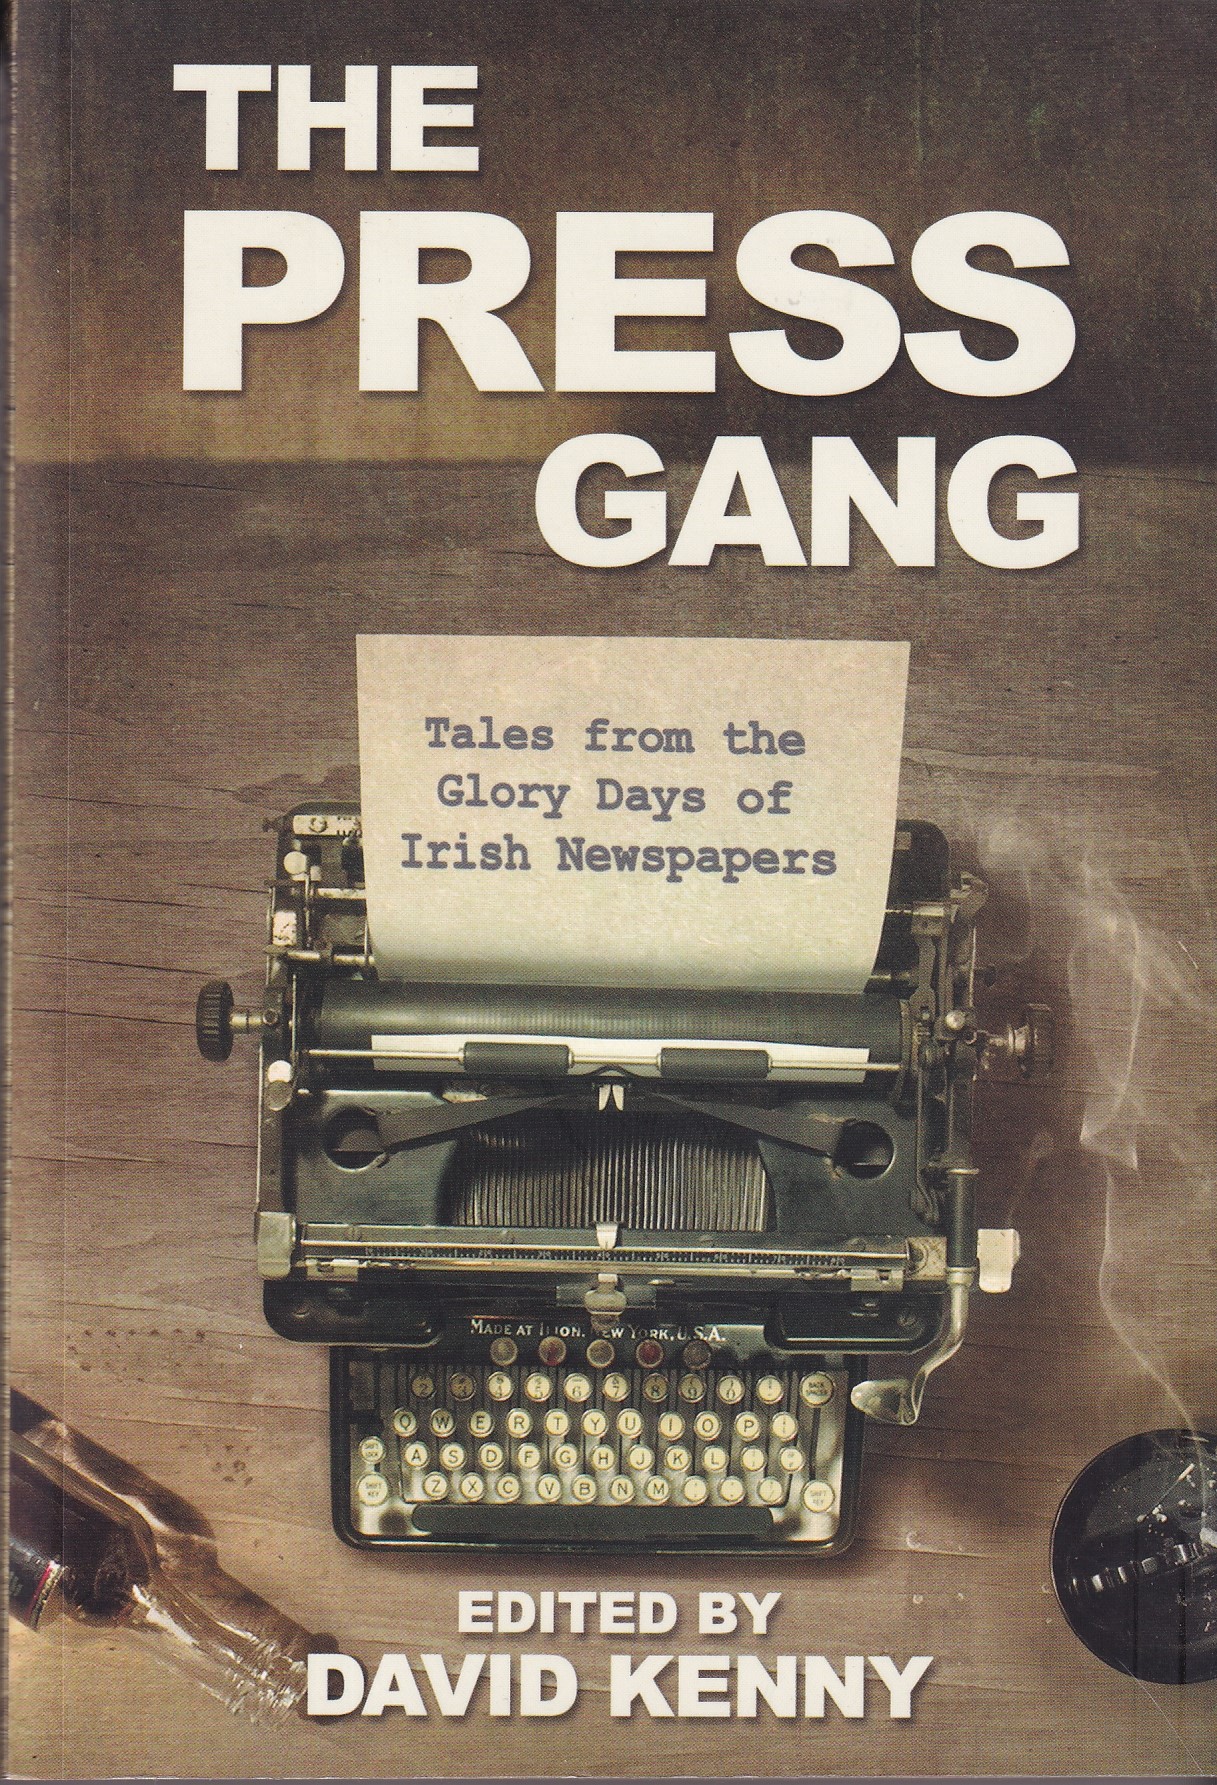 The Press Gang: Tales from the Glory Days of Irish Newspapers by Kenny, David ed.